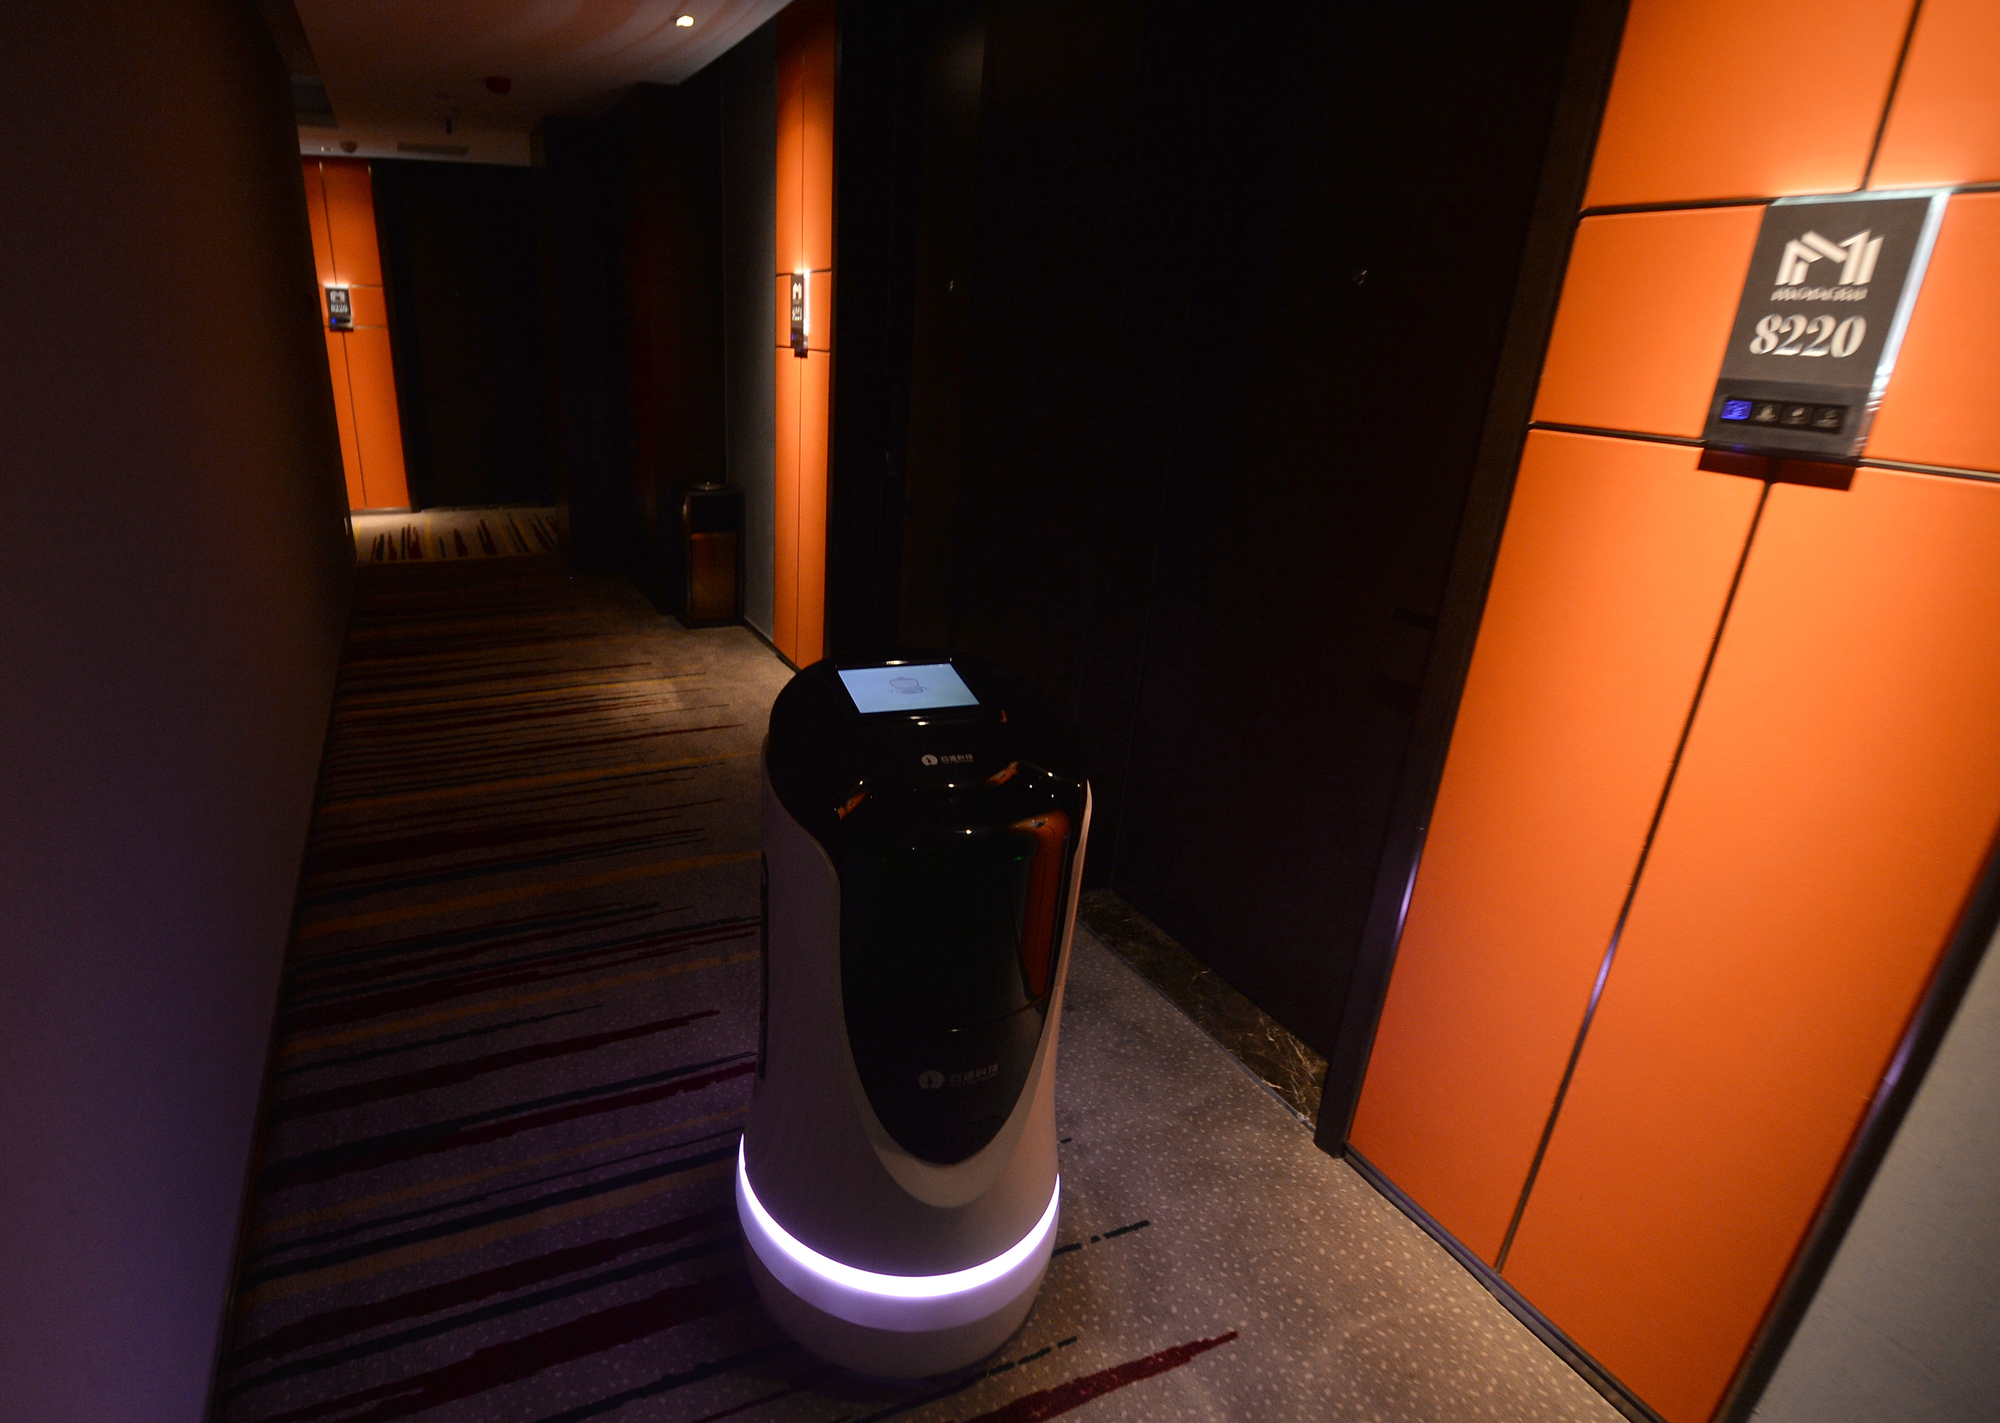 Robot-run hotels are here, but guests have mixed reviews